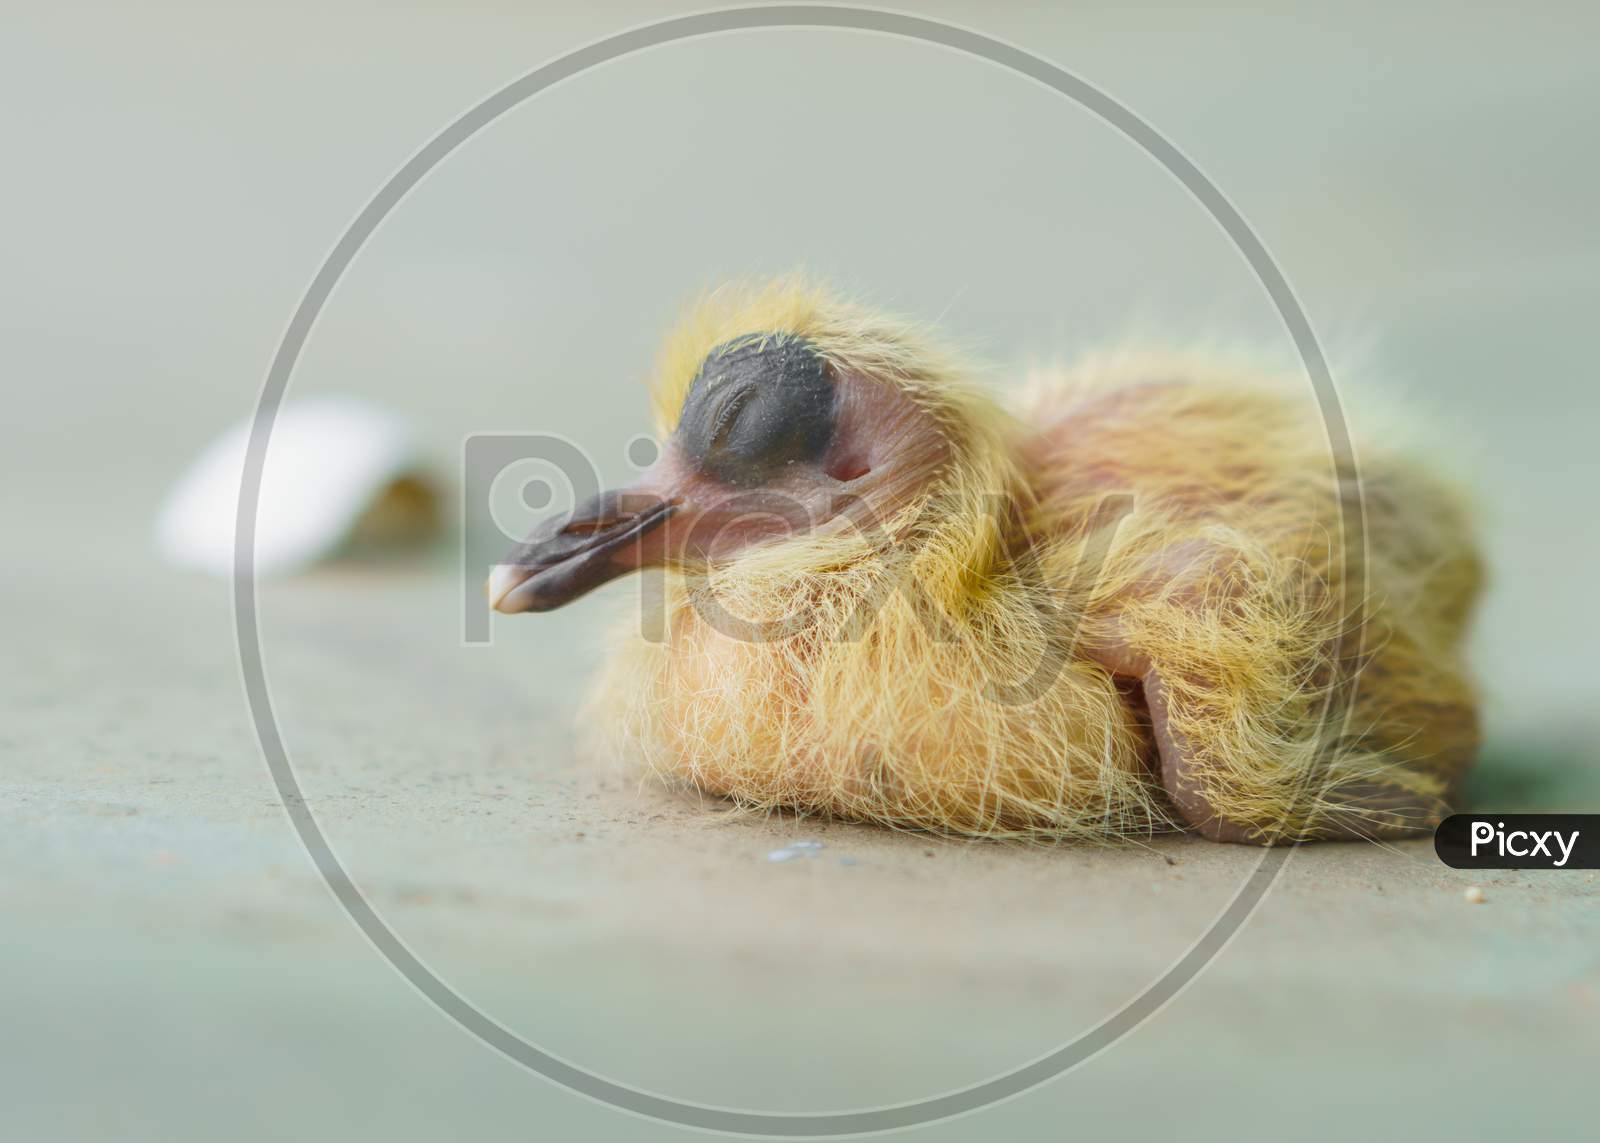 A new born Homeless  bird just coming out from shell and still sleep without thinking upcoming reality